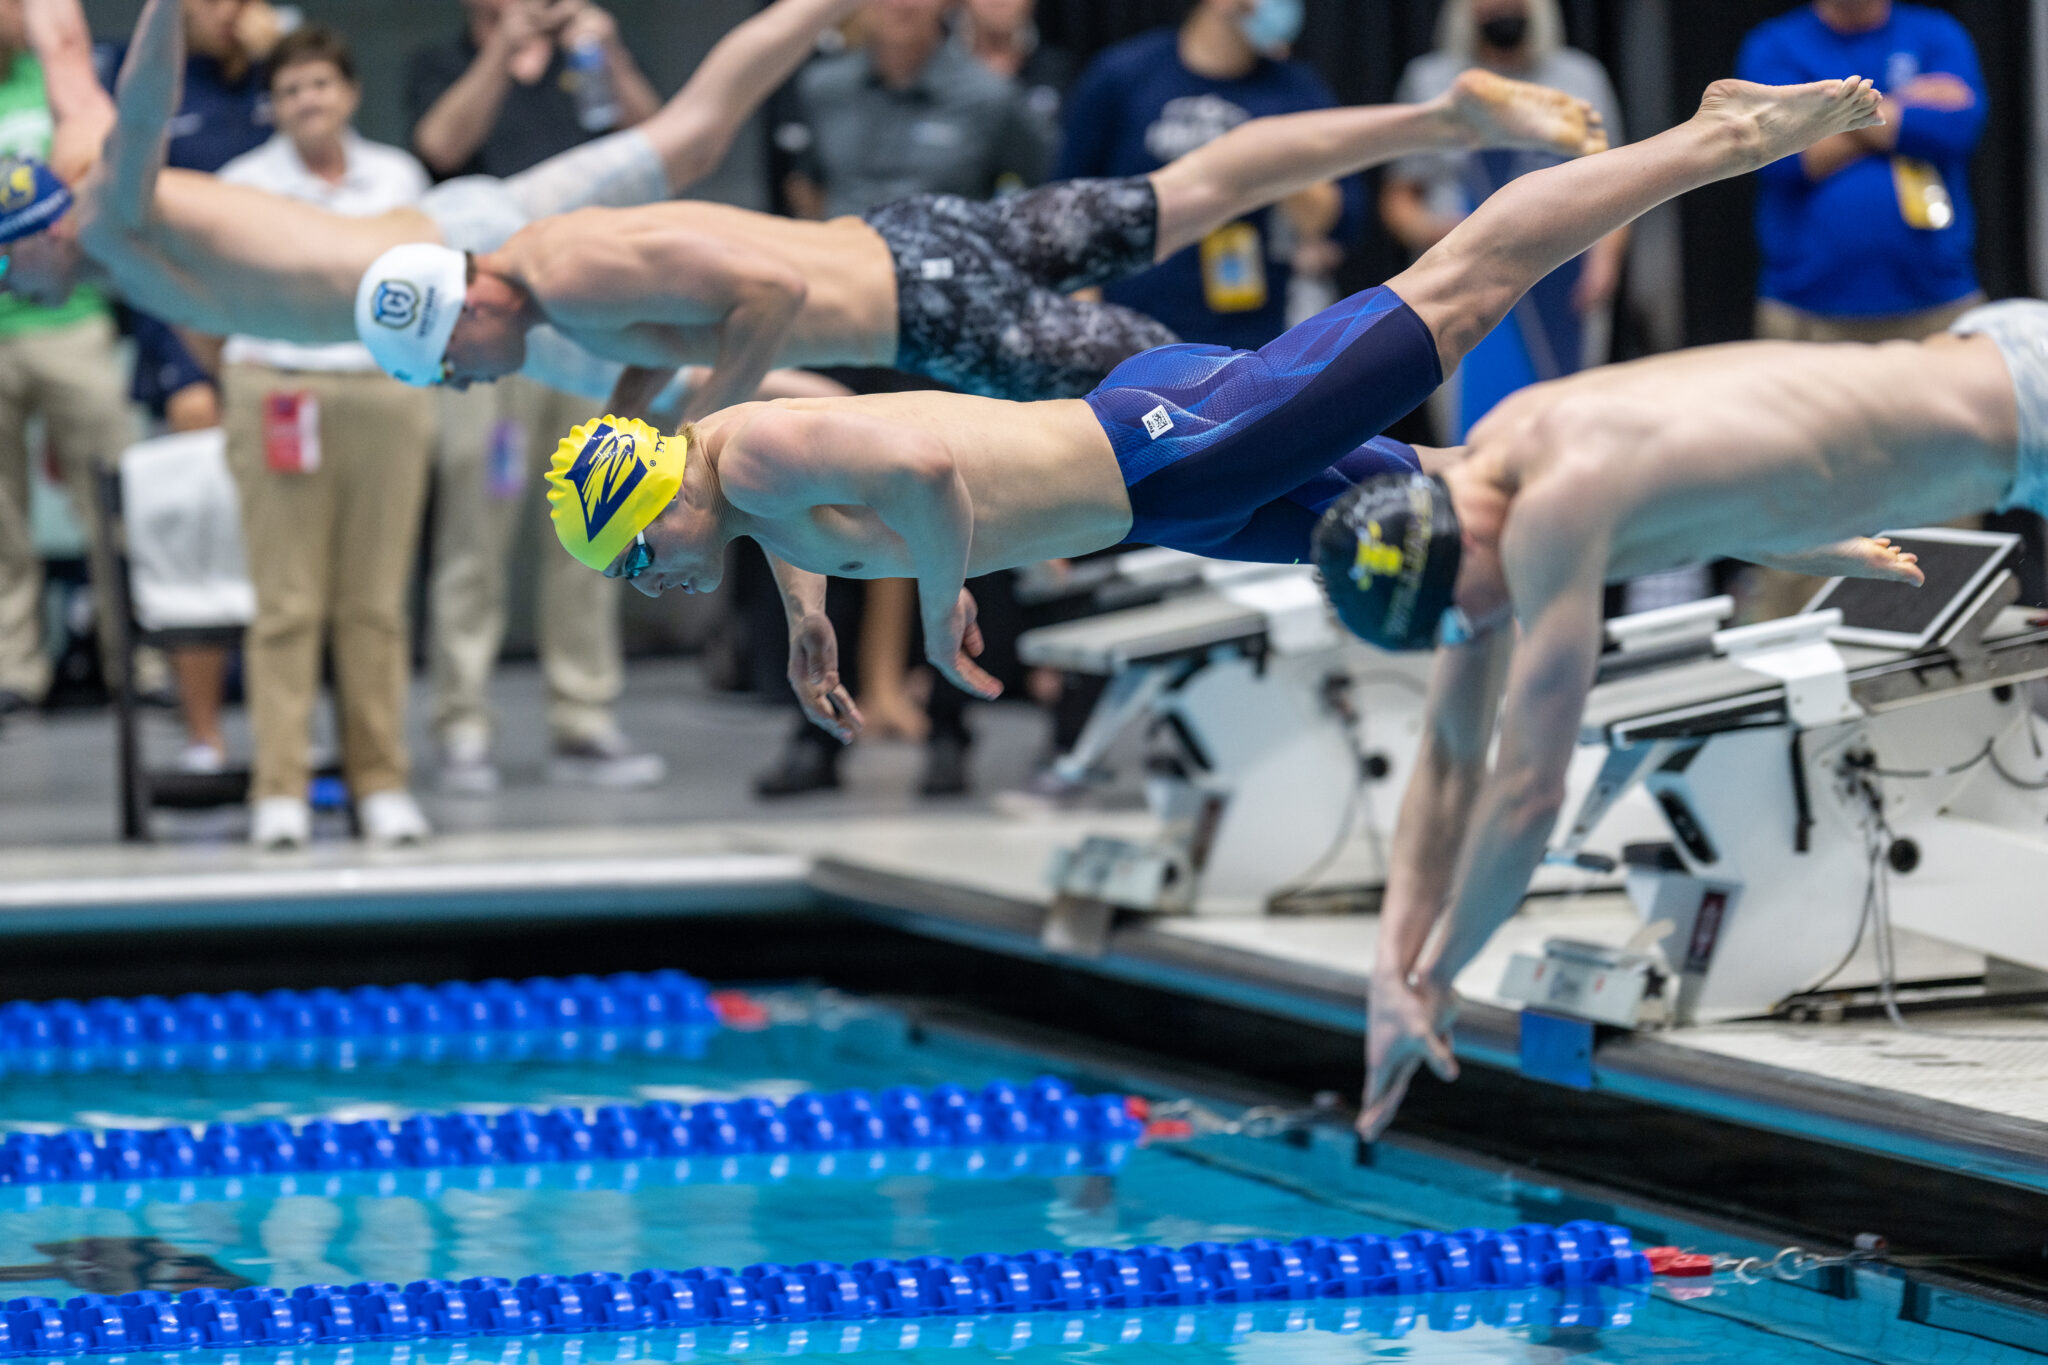 ncaa division 3 swimming championships 2022 live stream